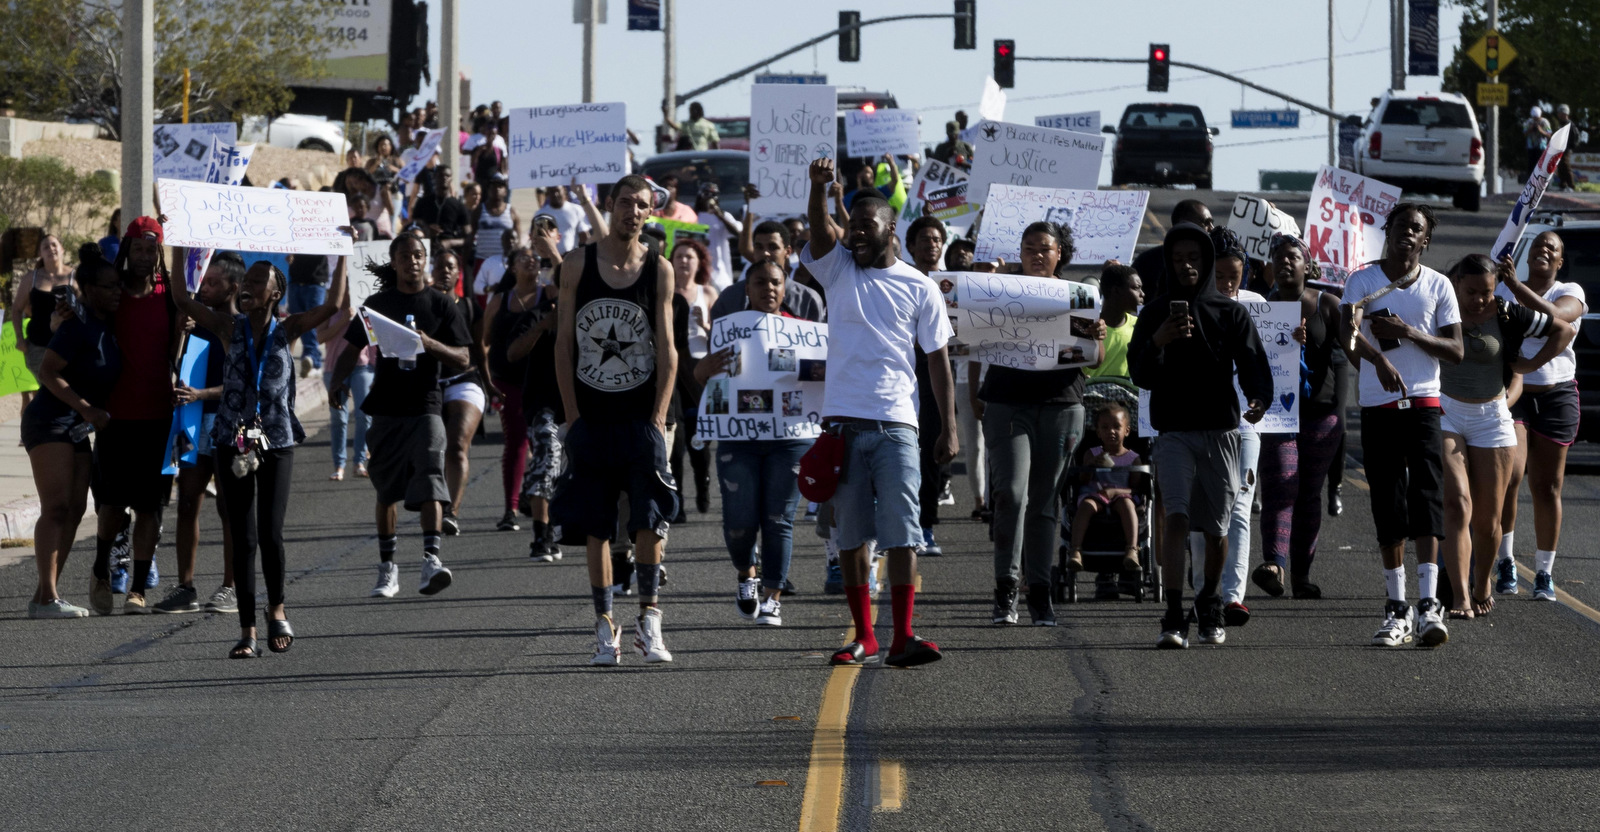 Protesters fill Barstow road in Barstow CA on Tuesday April 10, 2018 as part of a protest against the officer involved shooting of Diante "Butchie" Yarber. (James Quigg/Daily Press via AP)